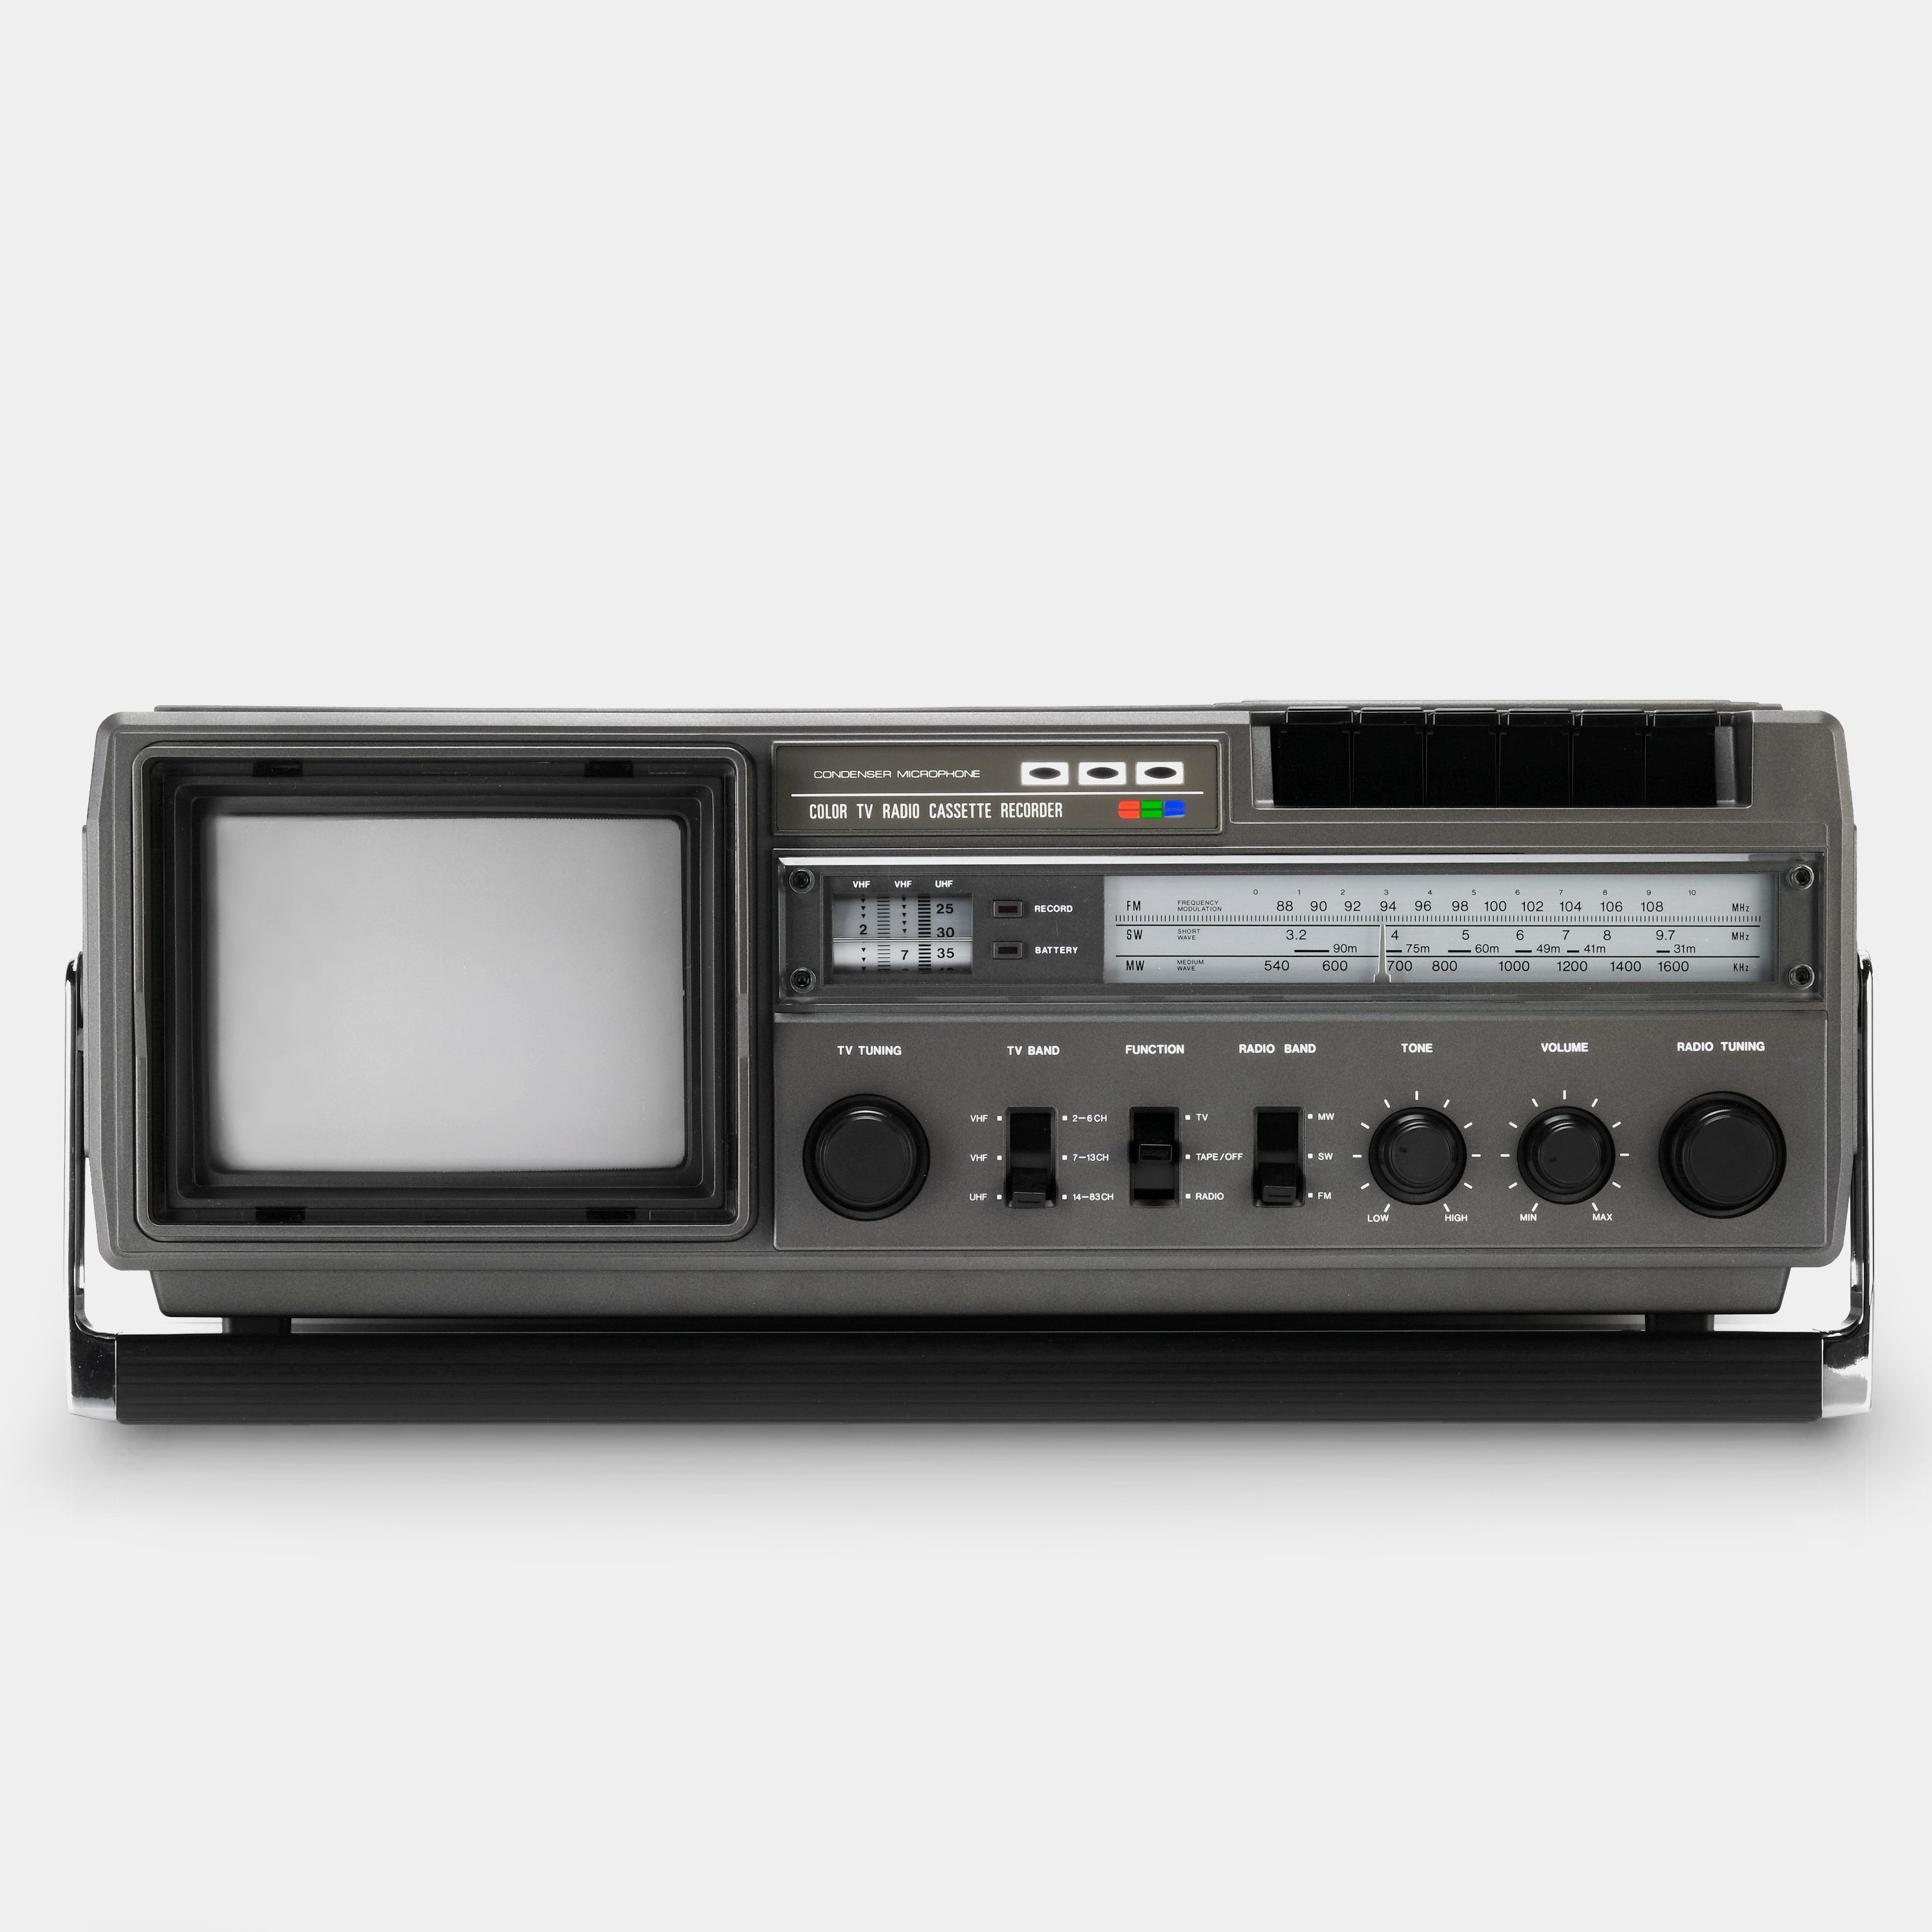 Broksonic by Otake CCIRT-3627 5.5 Inch Color TV with MW/FM/SW Radio and Cassette Recorder (New Old Stock)